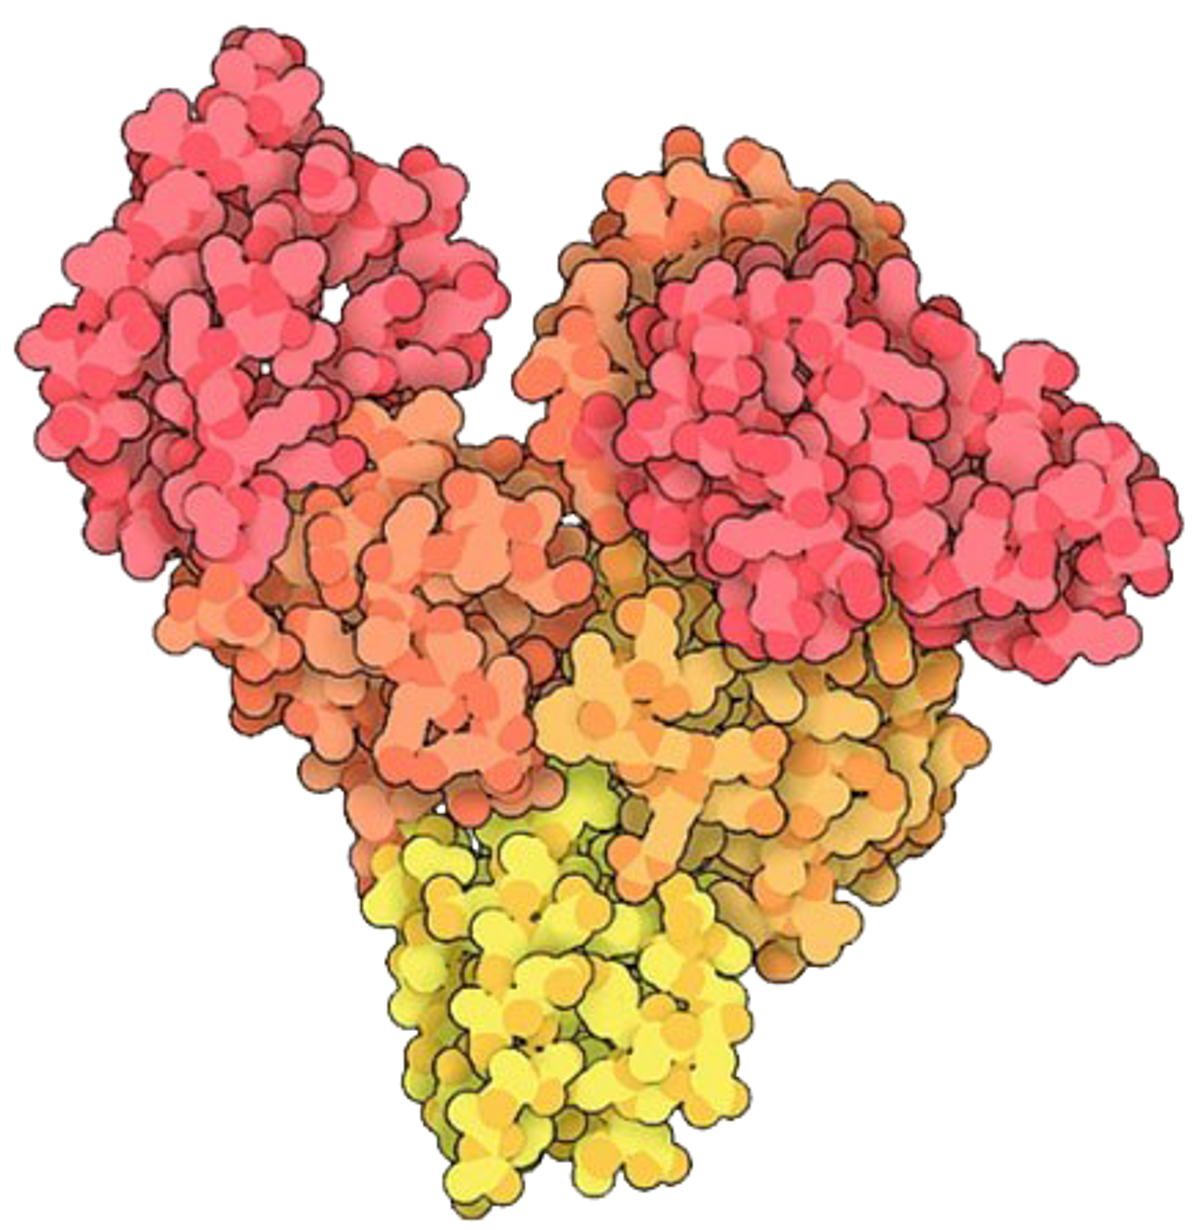 A 3D rendering of an albumin’s protein structure.